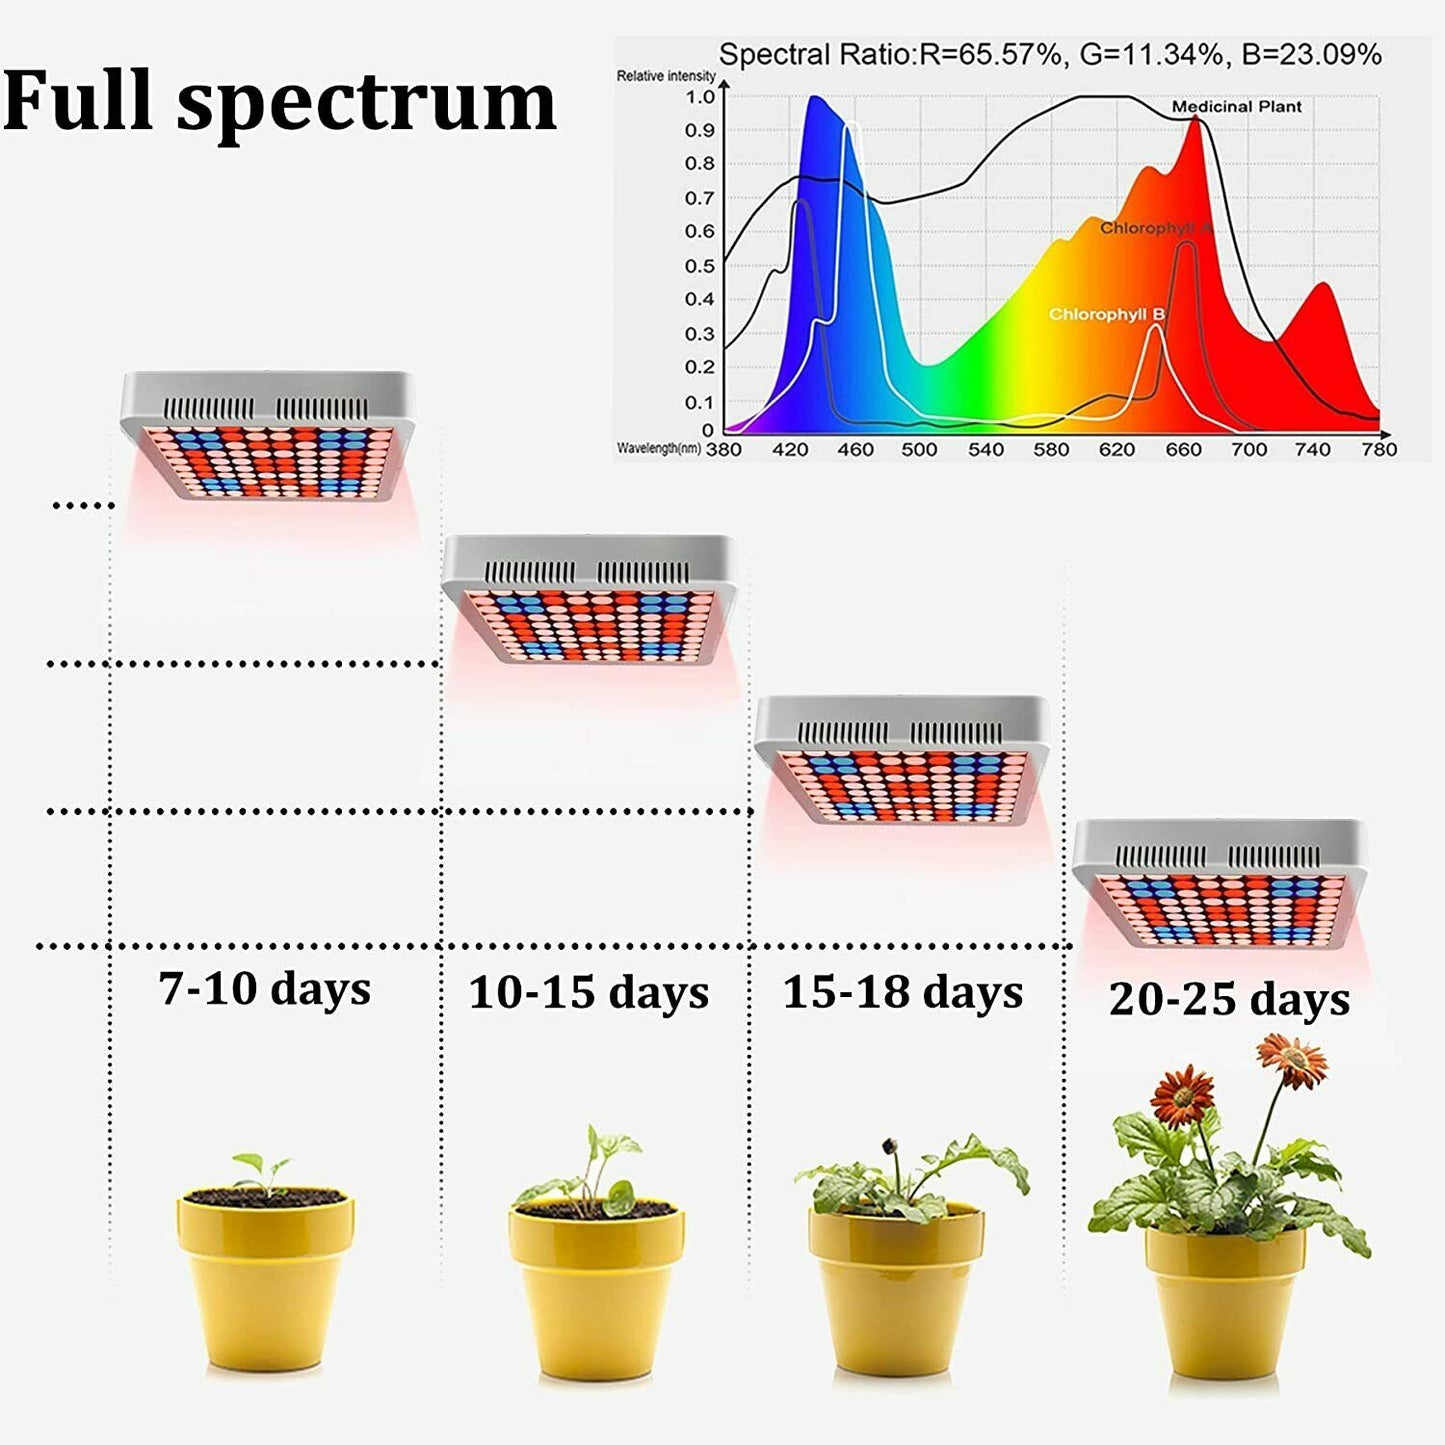 5000W LED Grow Light Full Spectrum Tube Growing Lamp Hydroponic For Indoor Plant